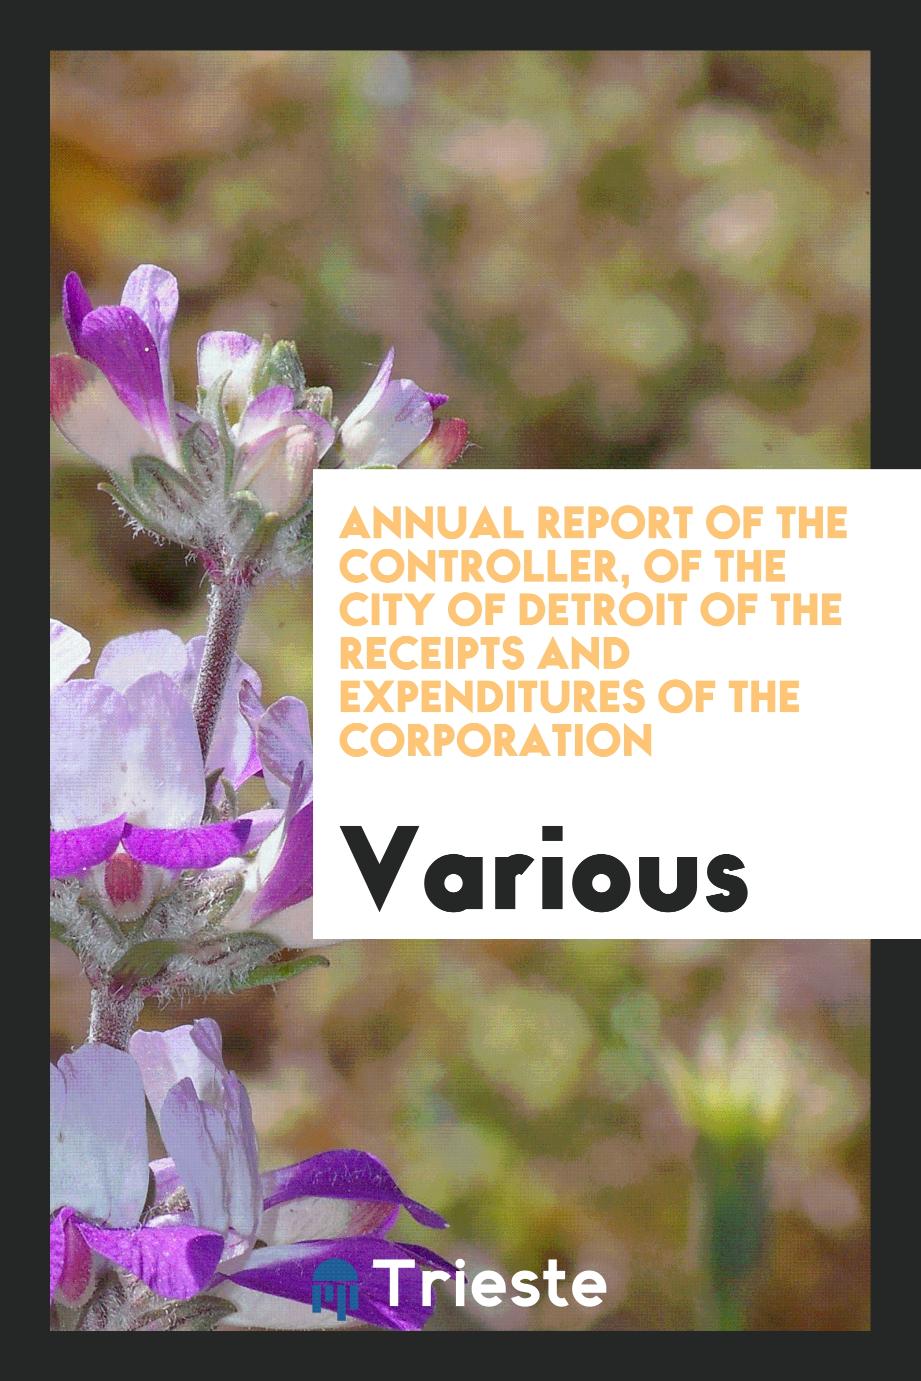 Annual Report of the Controller, of the City of Detroit of the Receipts and Expenditures of the Corporation